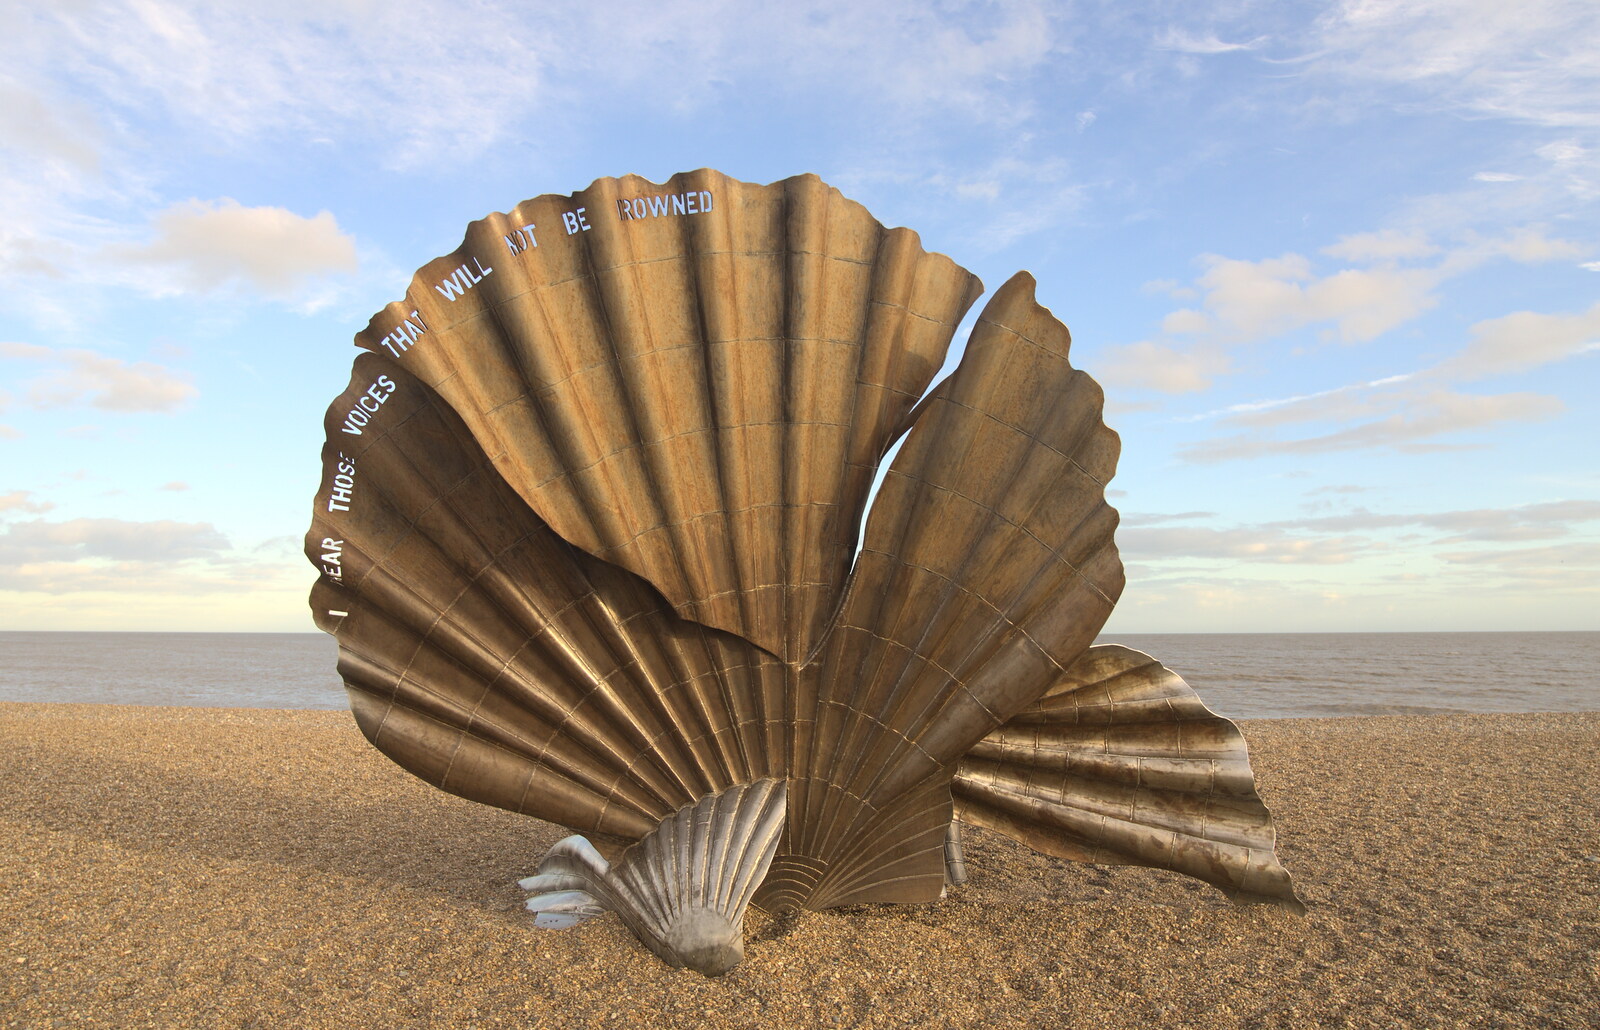 Maggi Hambling's controversial sea shell from A Trip to Aldeburgh, Suffolk - 7th February 2016